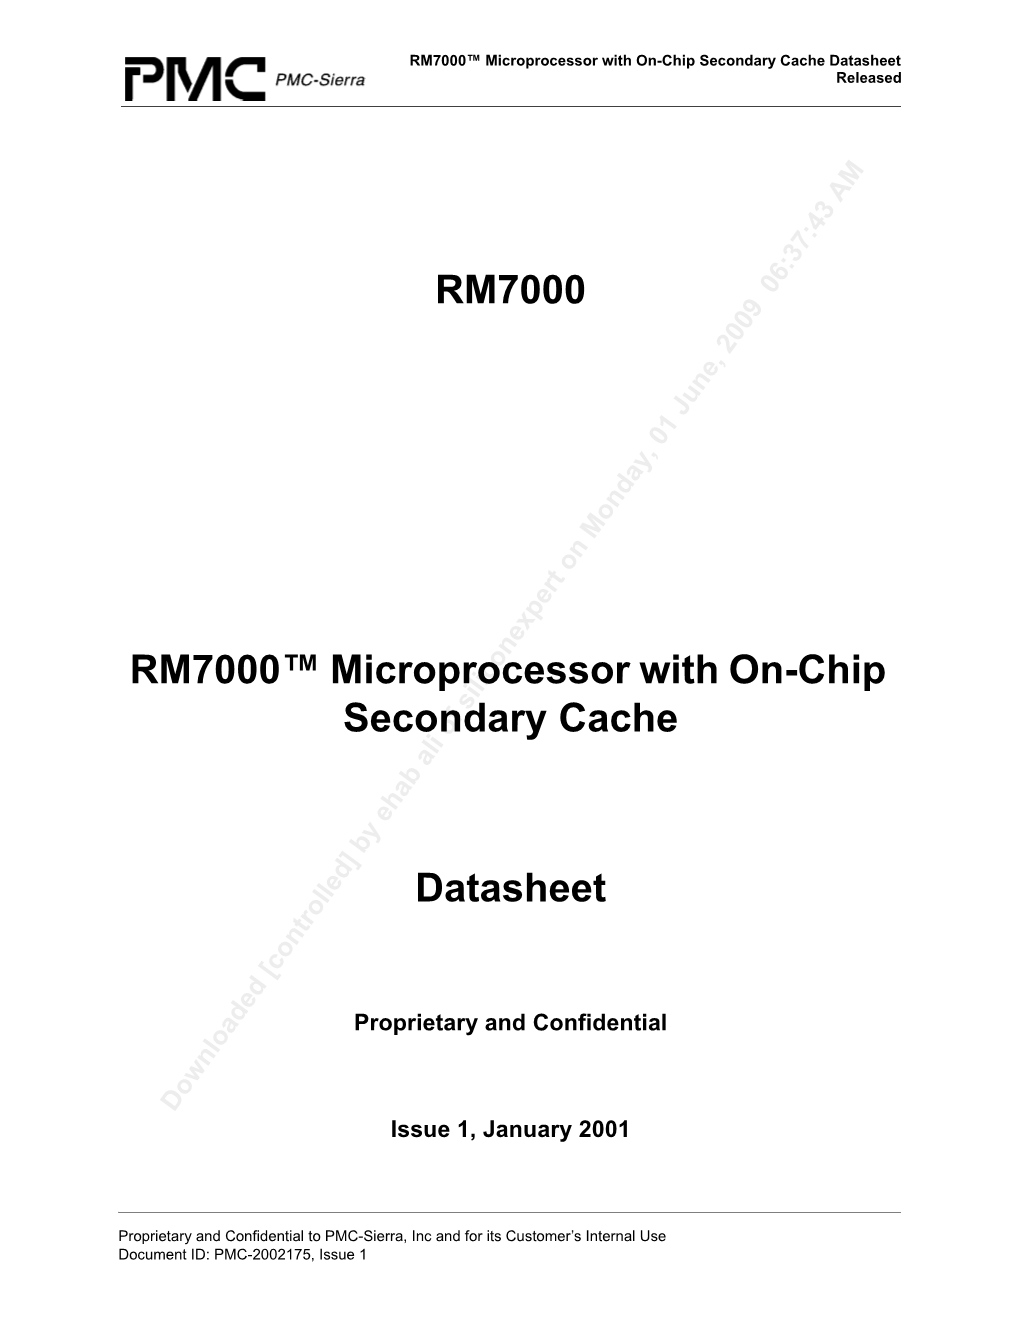 RM7000™ Microprocessor with On-Chip Secondary Cache Datasheet Released